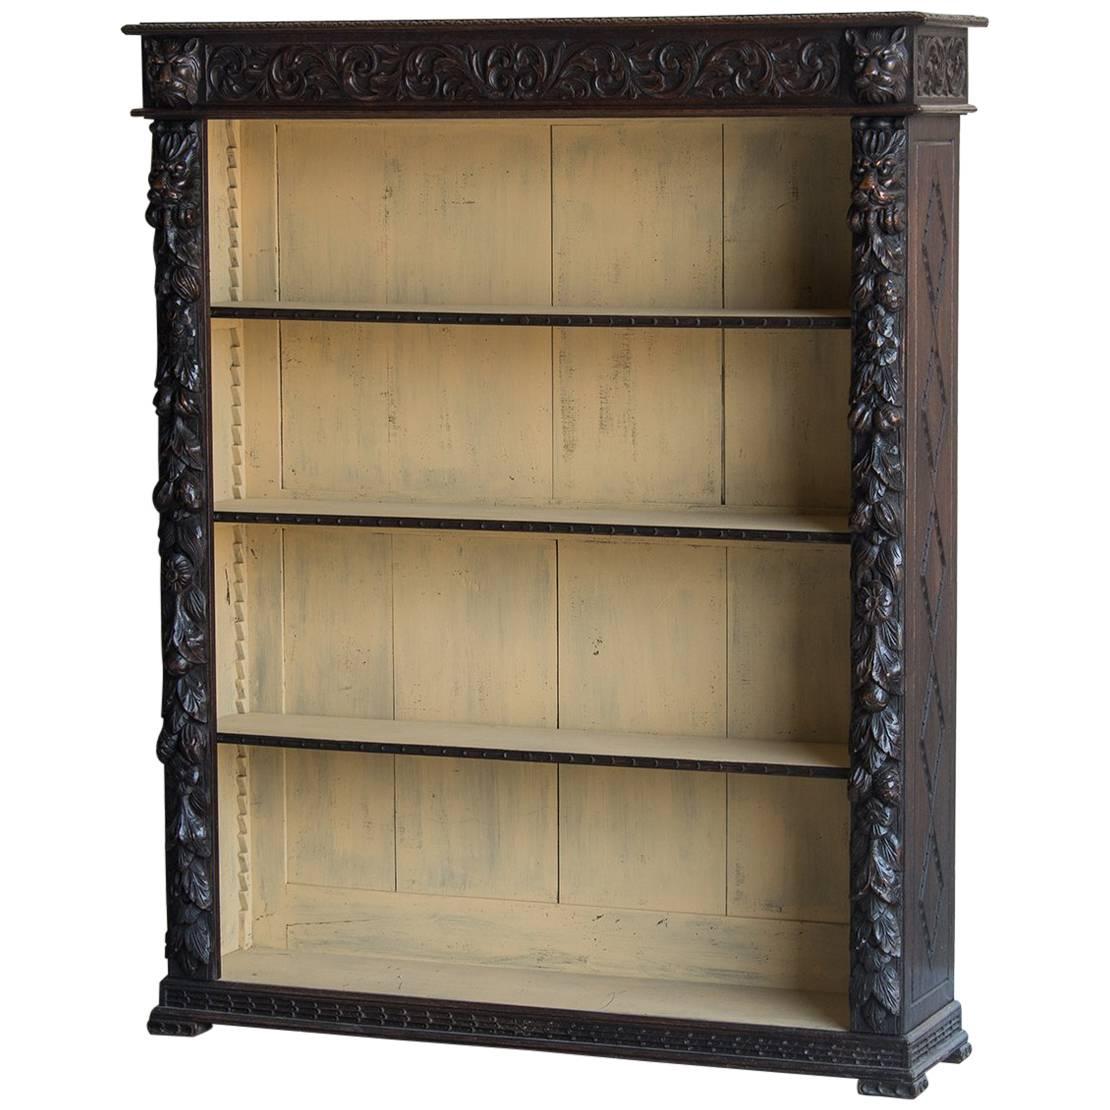 Antique English Carved Oak Bookcase Display Cabinet, circa 1890